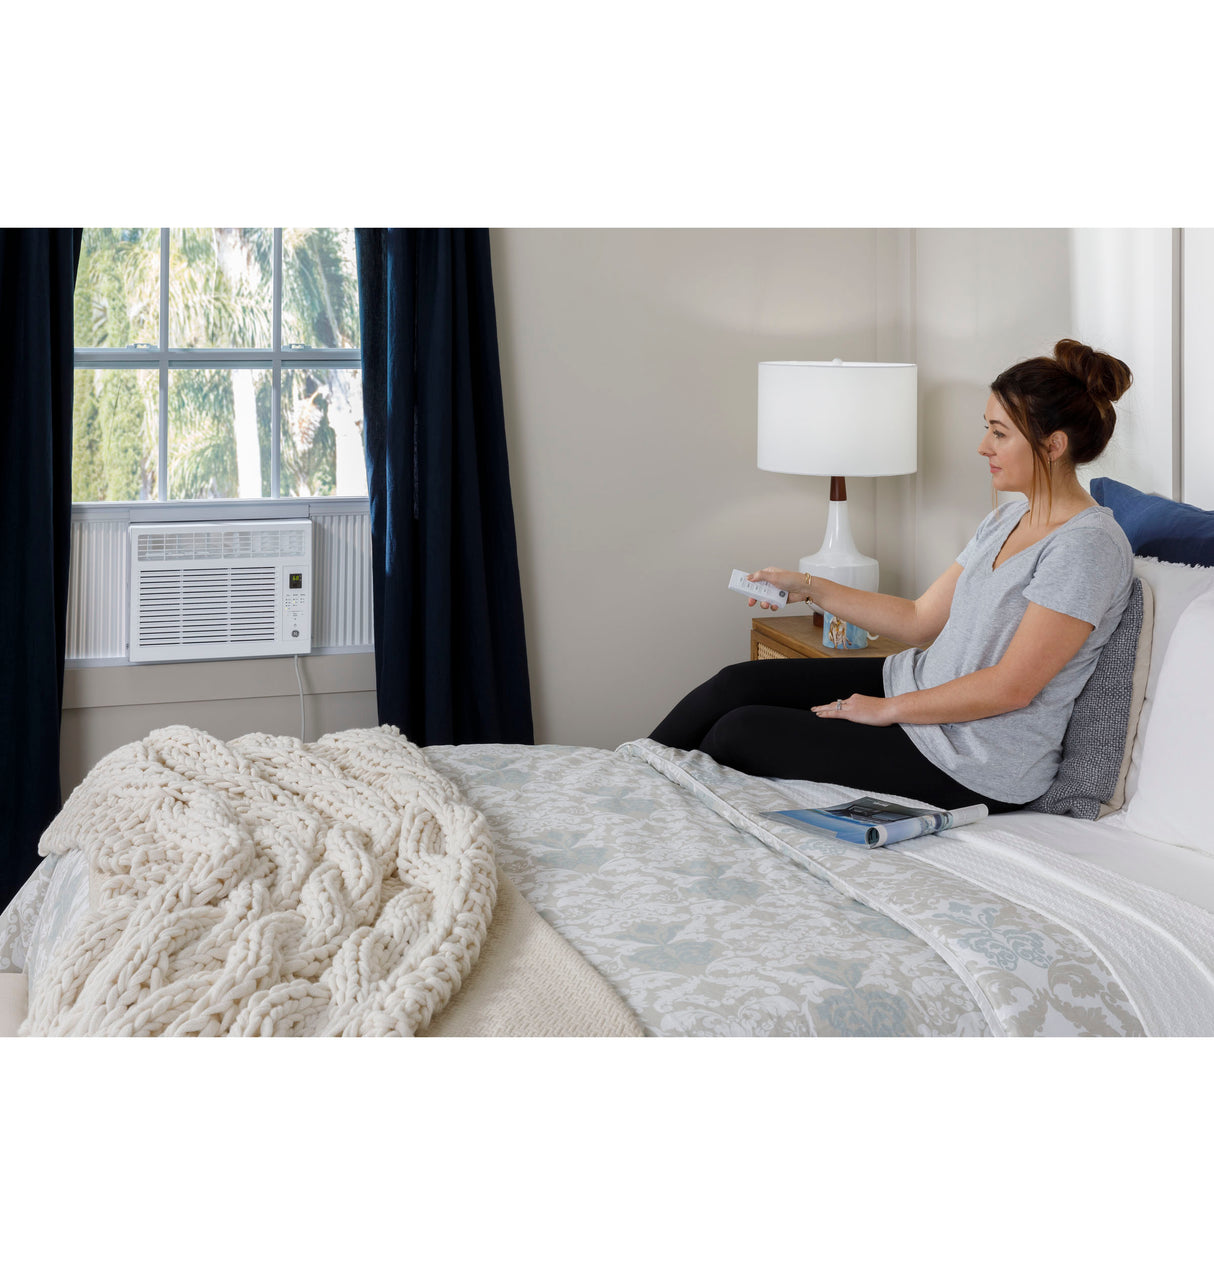 GE(R) 6,000 BTU Electronic Window Air Conditioner for Small Rooms up to 250 sq ft. - (AHW06LZ)